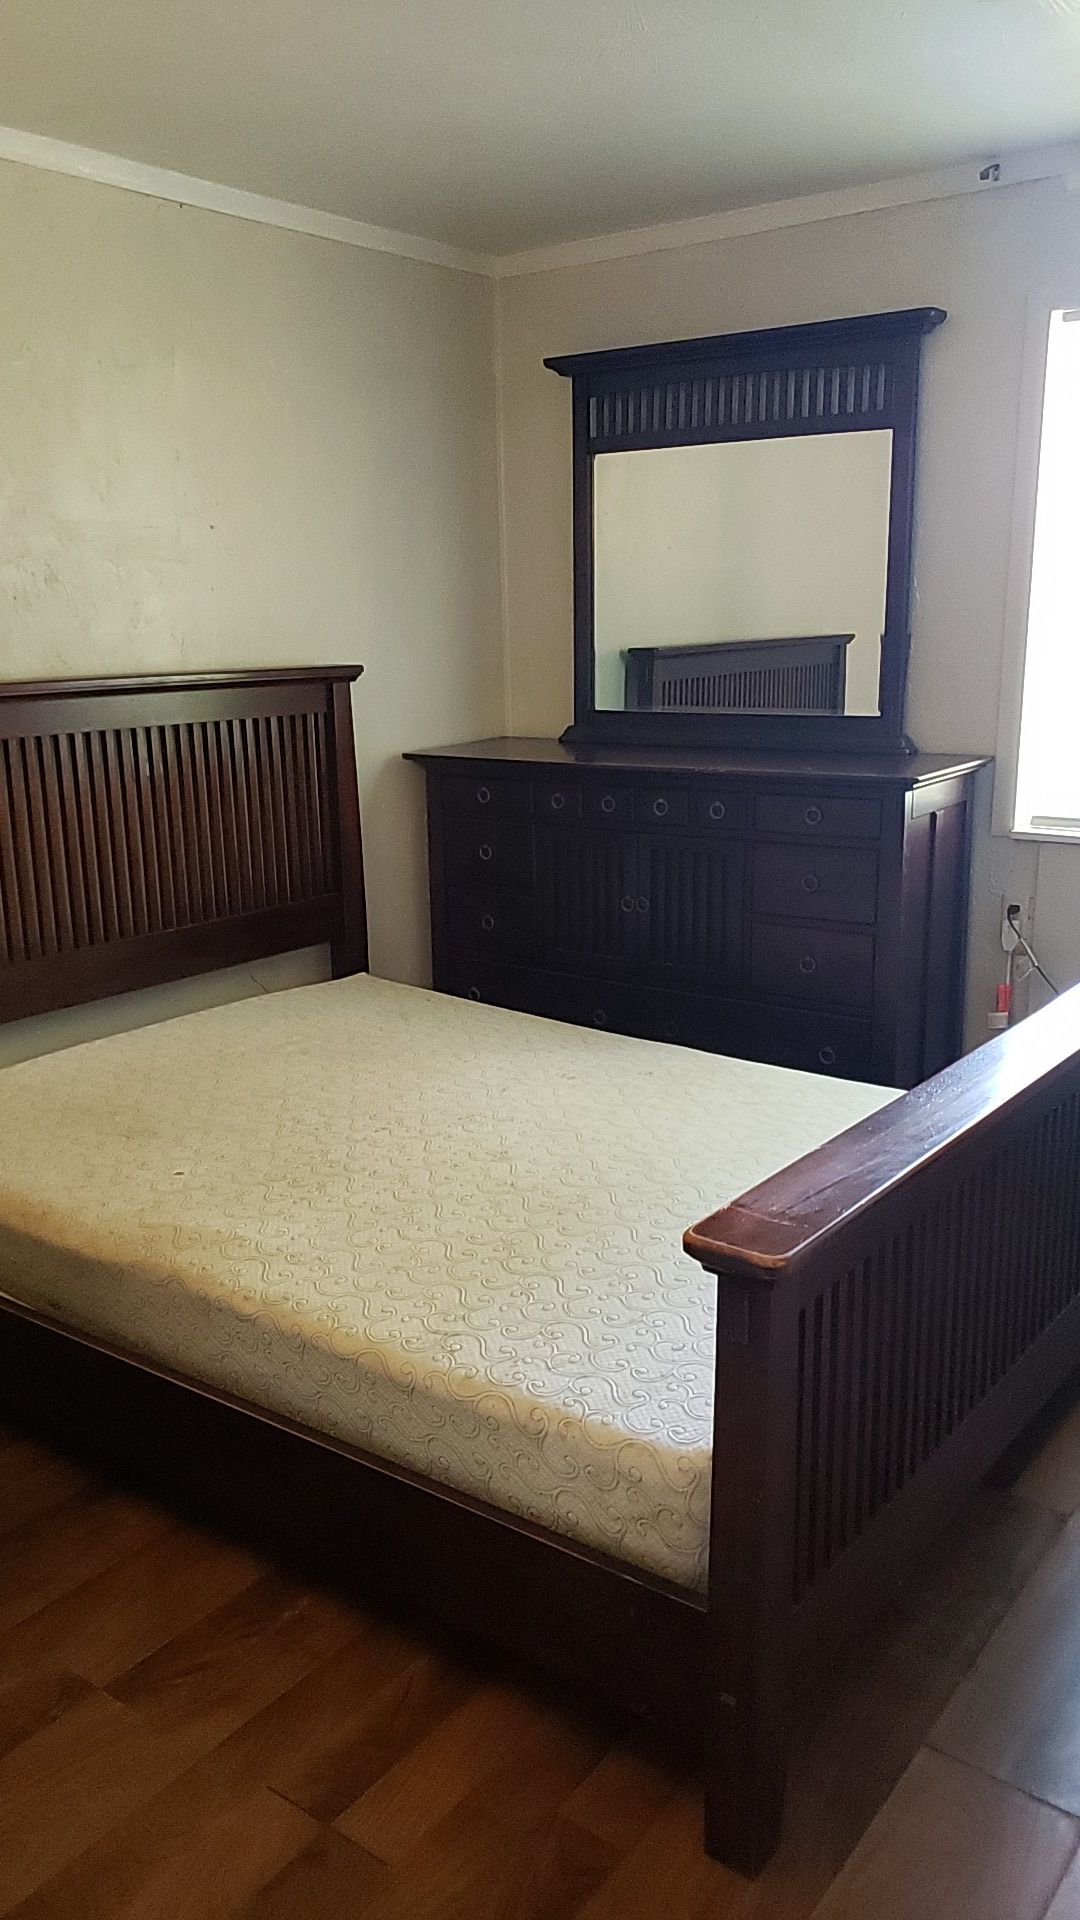 Queen bed and dresser with mattress